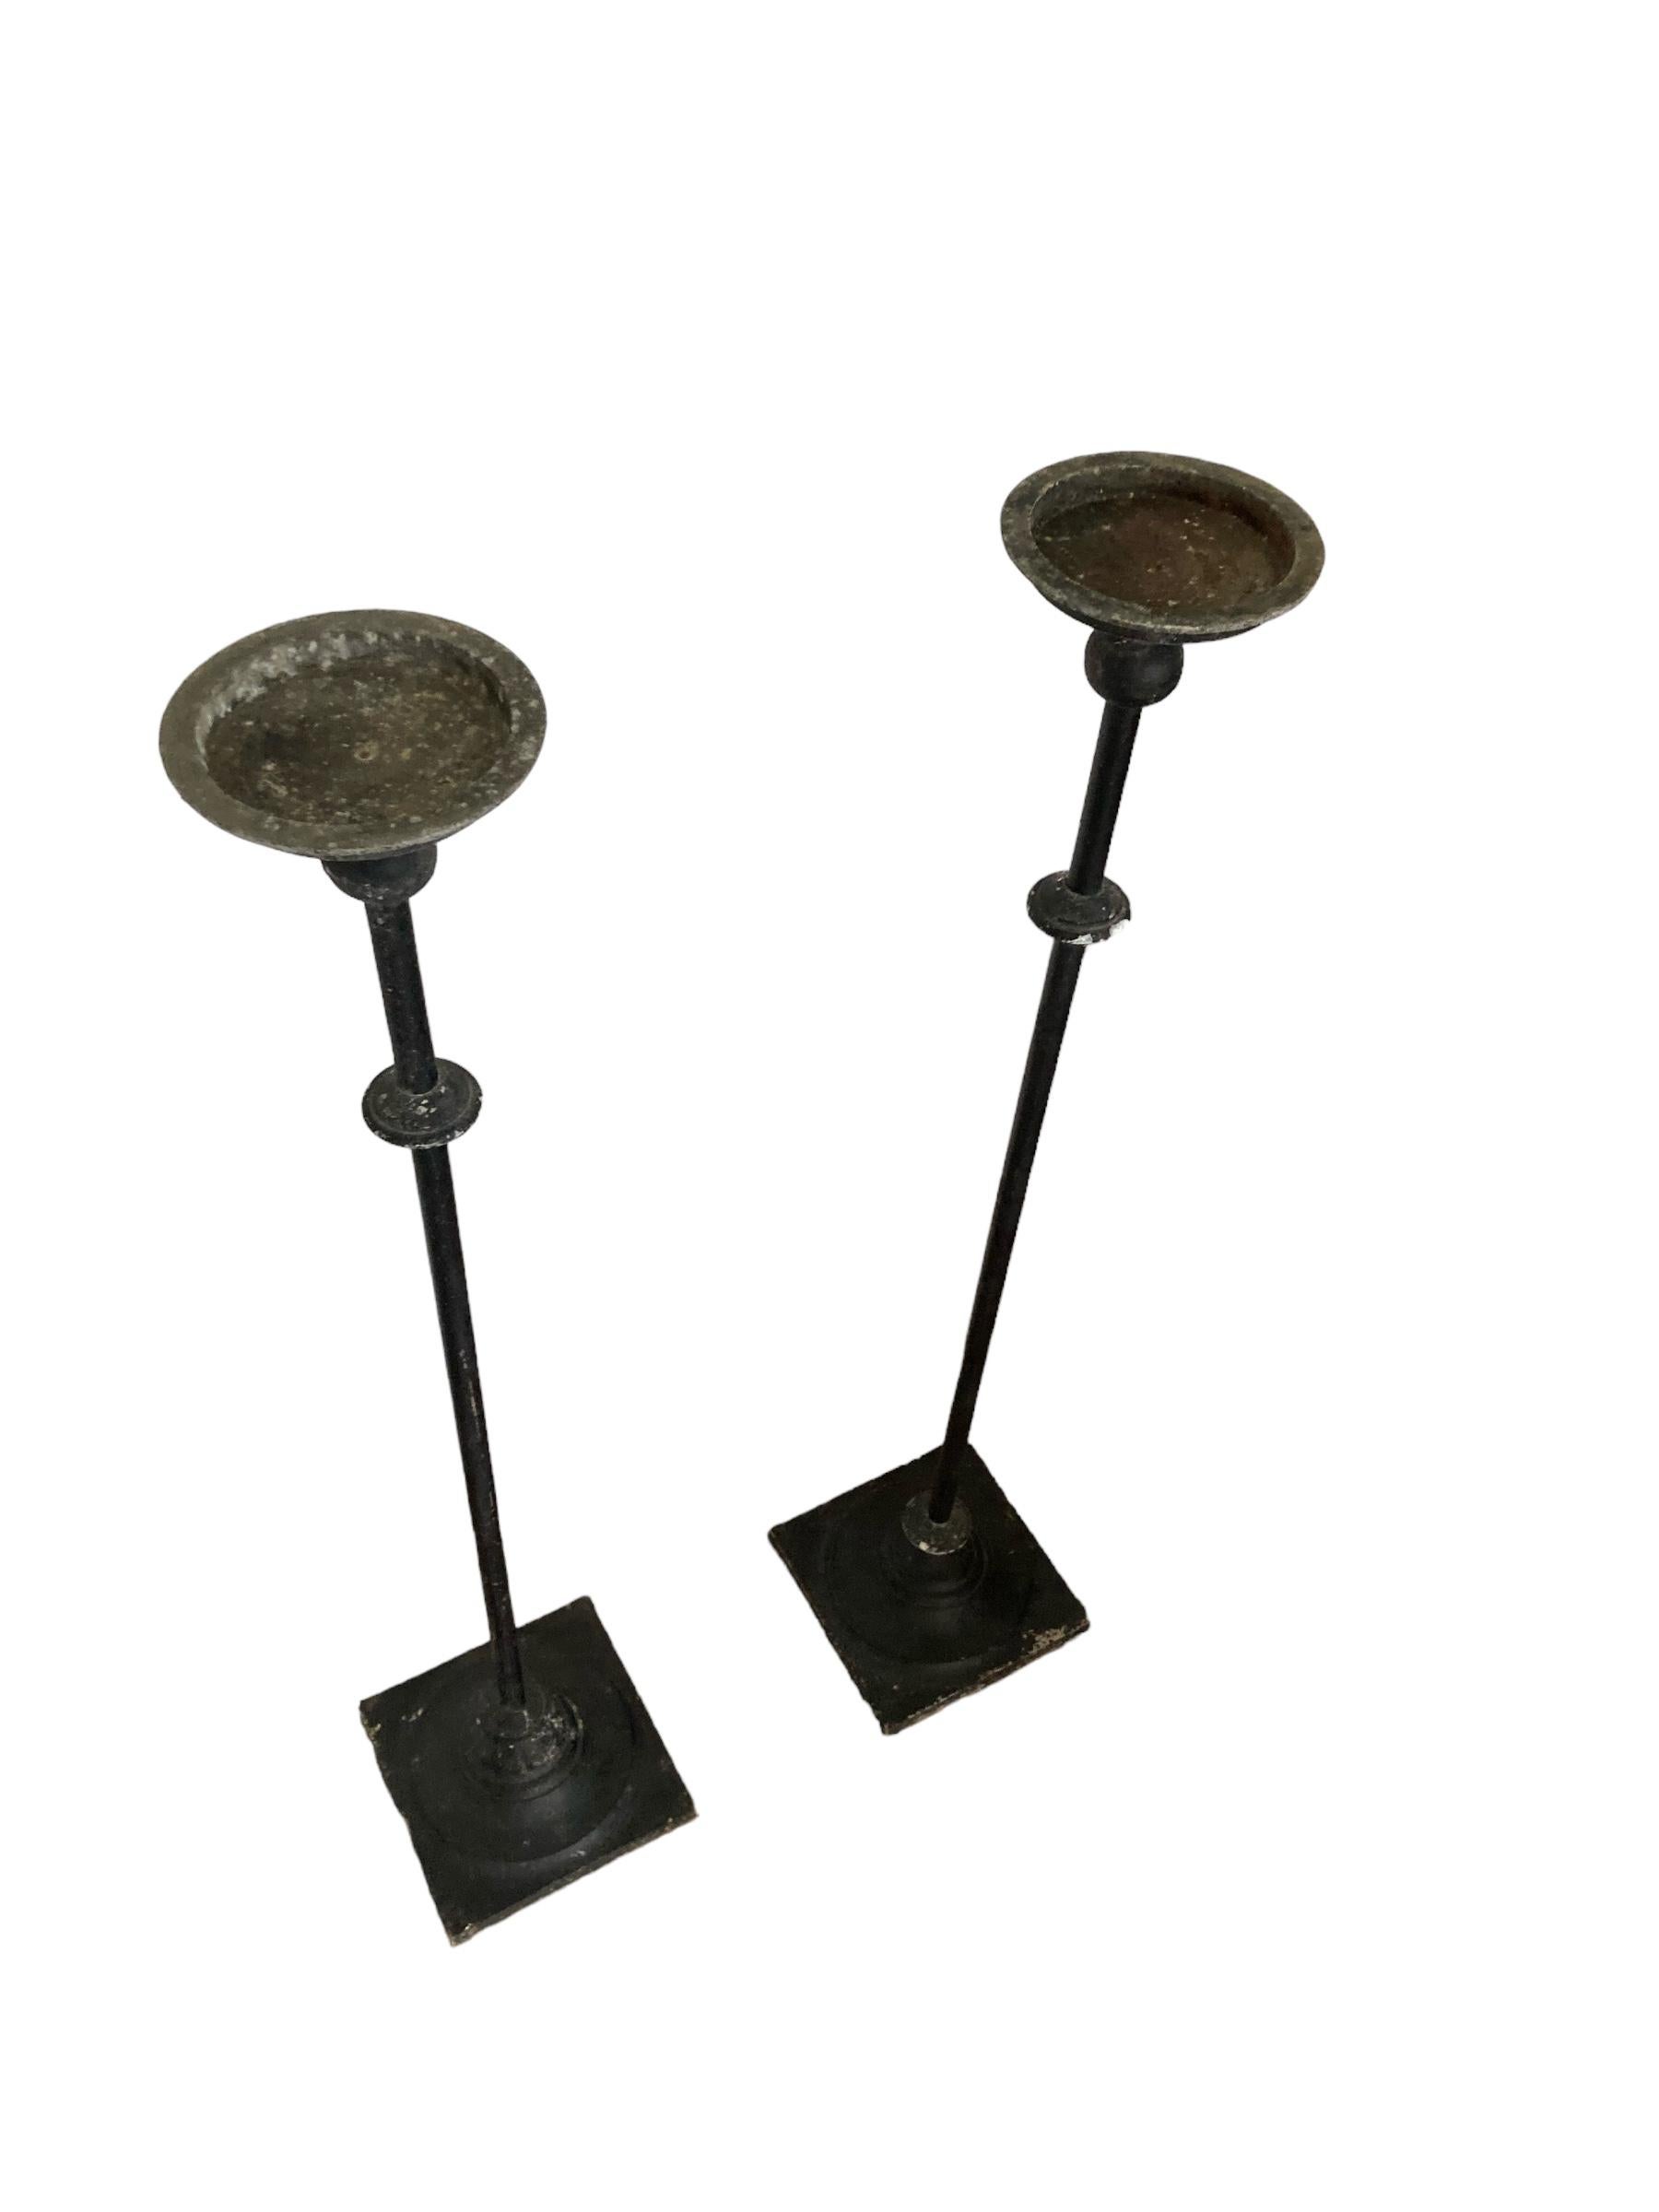 Gothic Revival A Pair of Tall Wrought Iron Church Floor Candle Holders Gothic Style For Sale